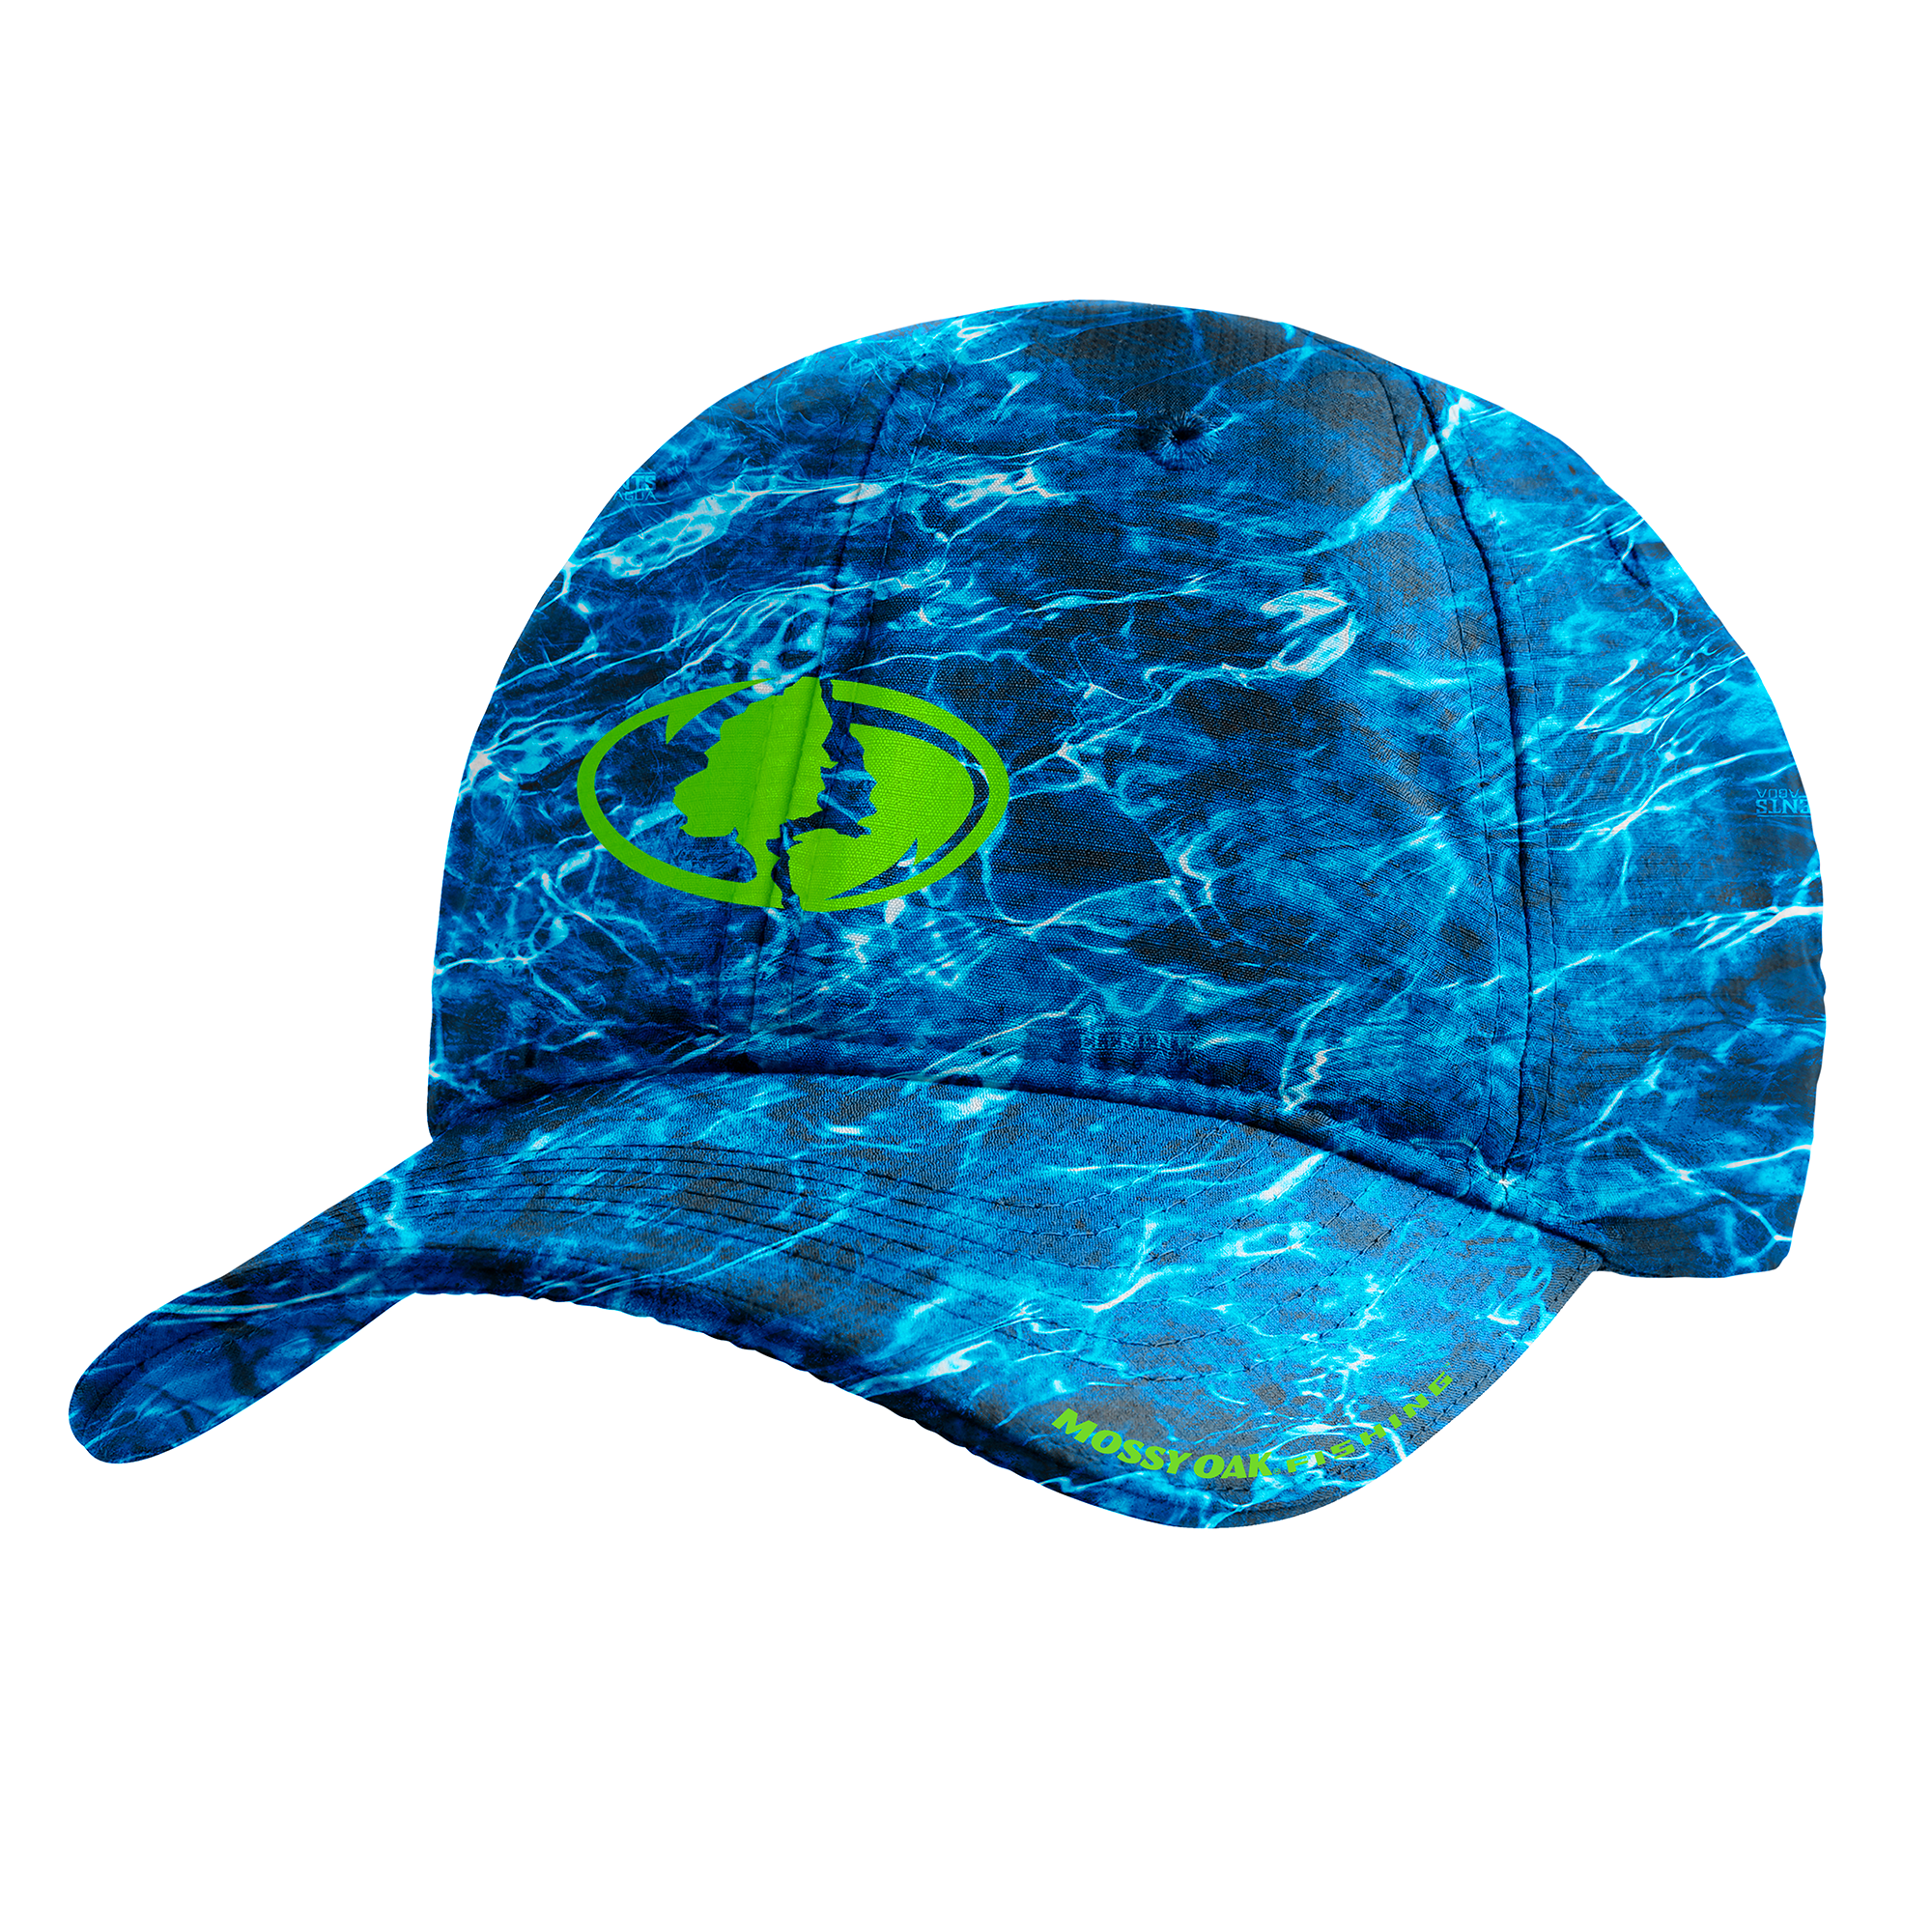 Mossy Oak Cooling Performance Hat Caps MISSION One Size Agua Marlin 